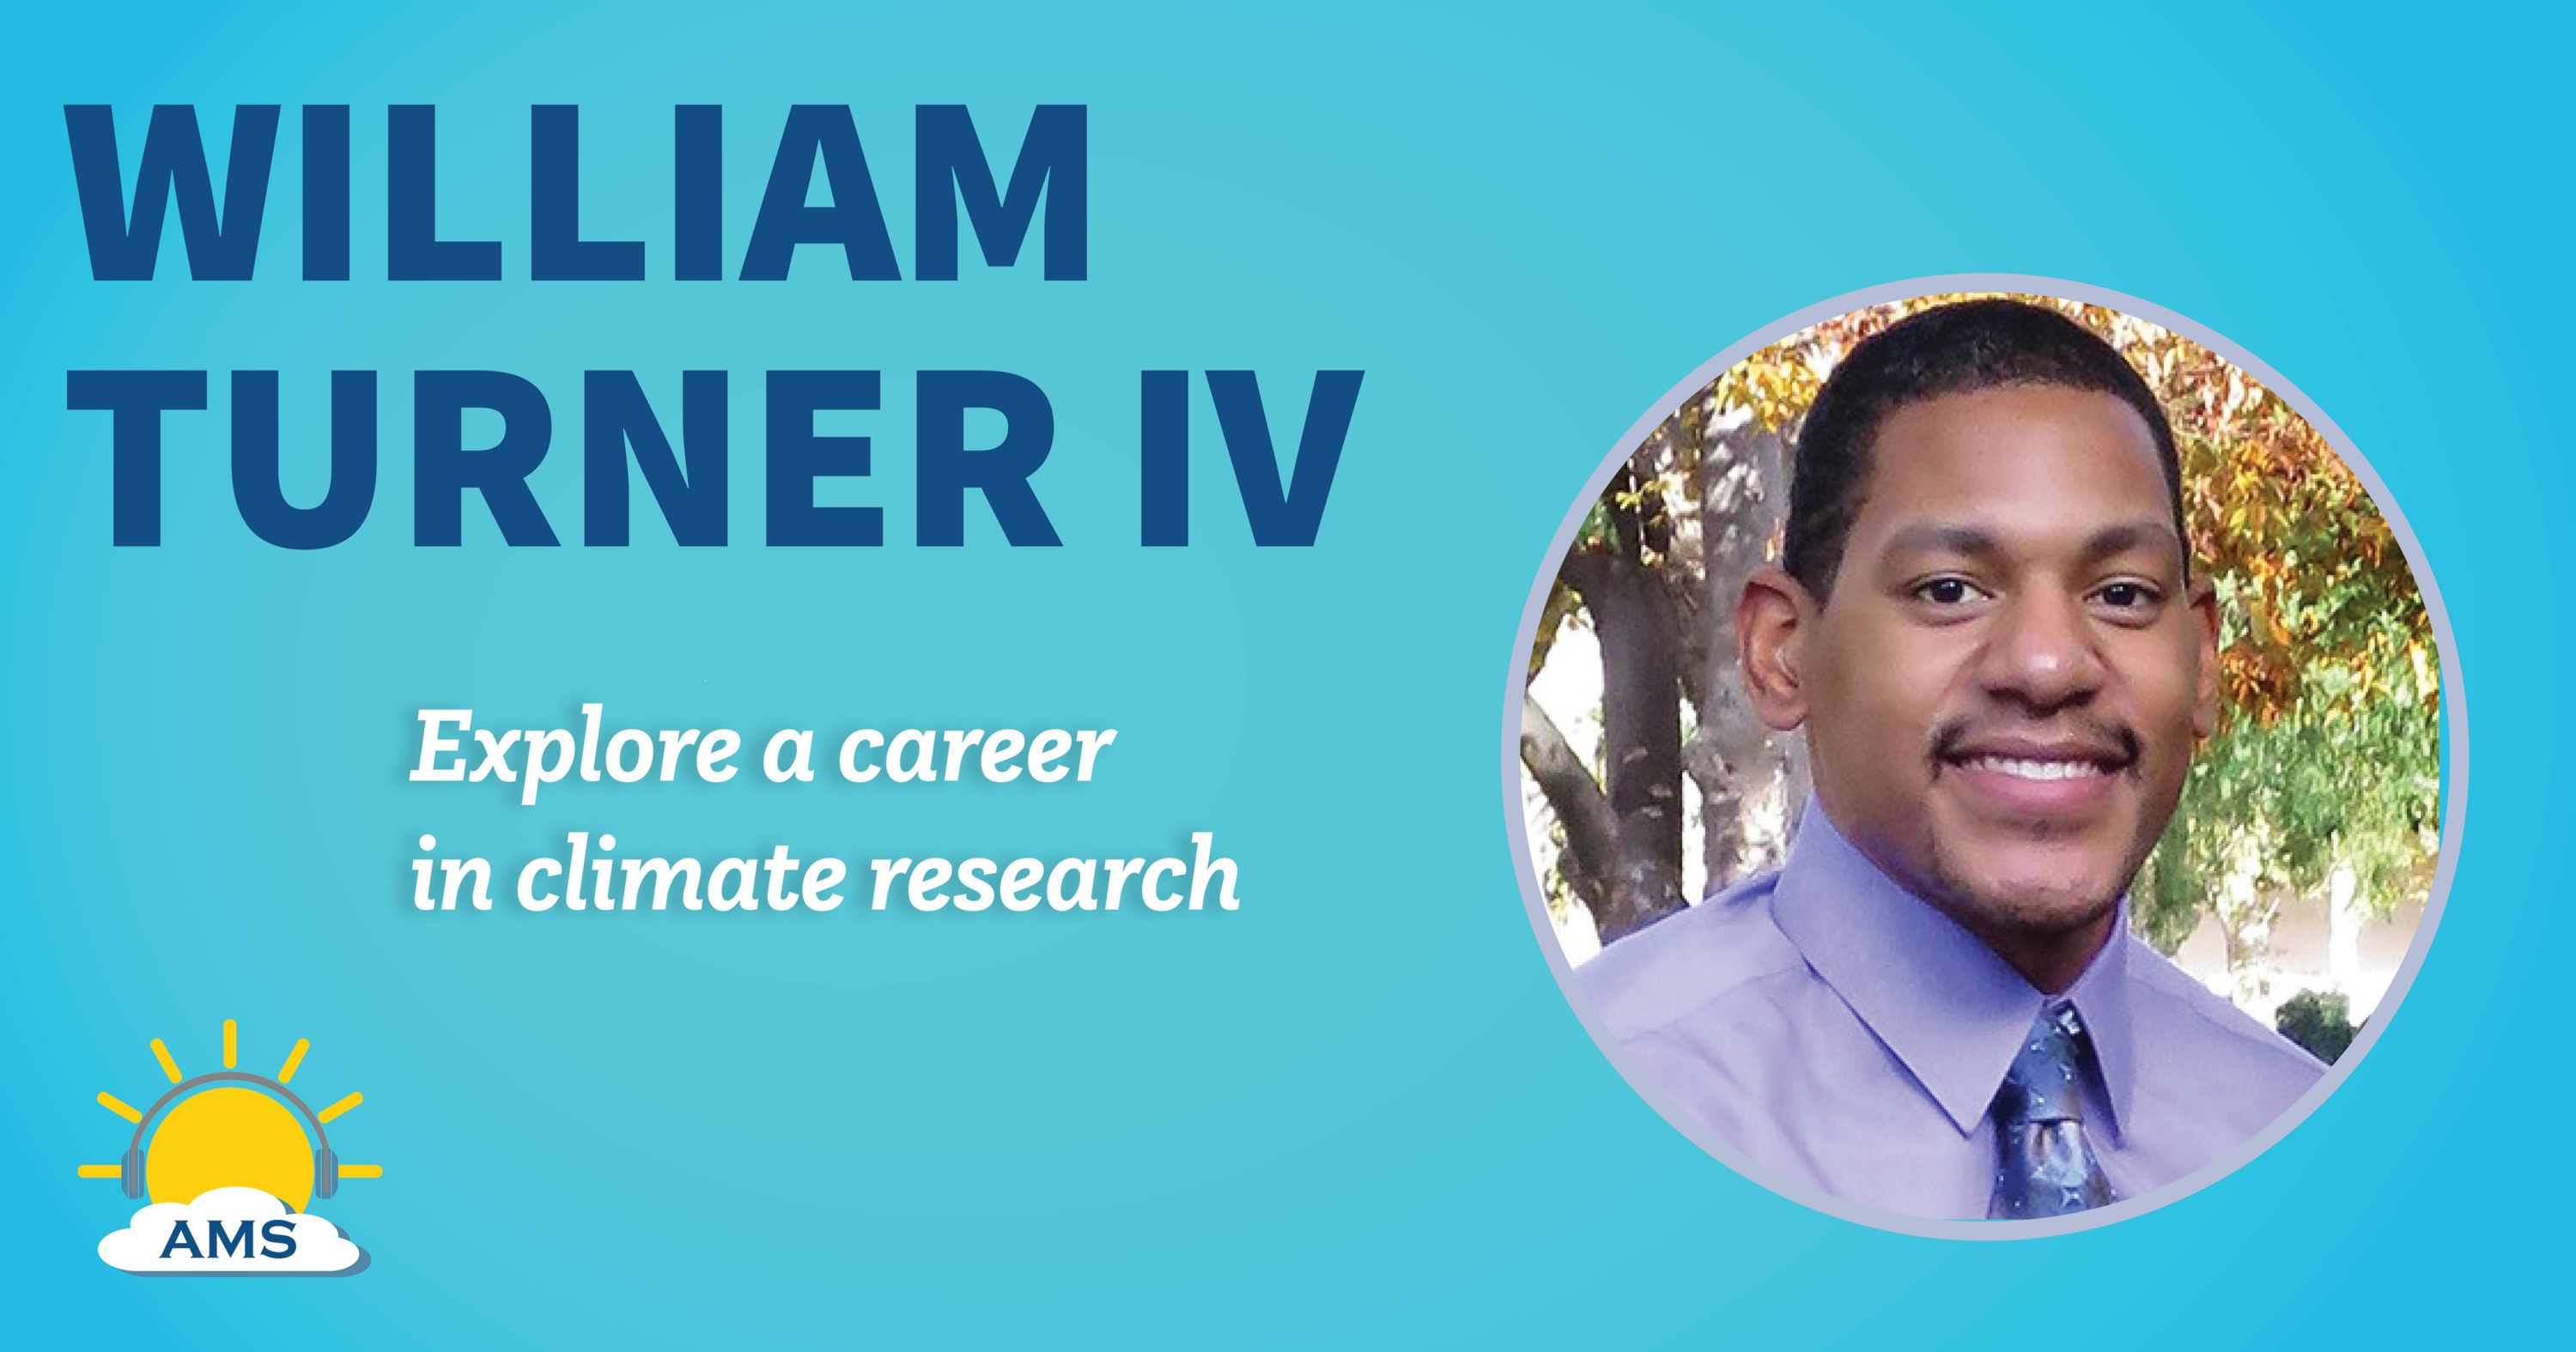 William Turner headshot graphic with teaser text that reads "explore a career in climate research "